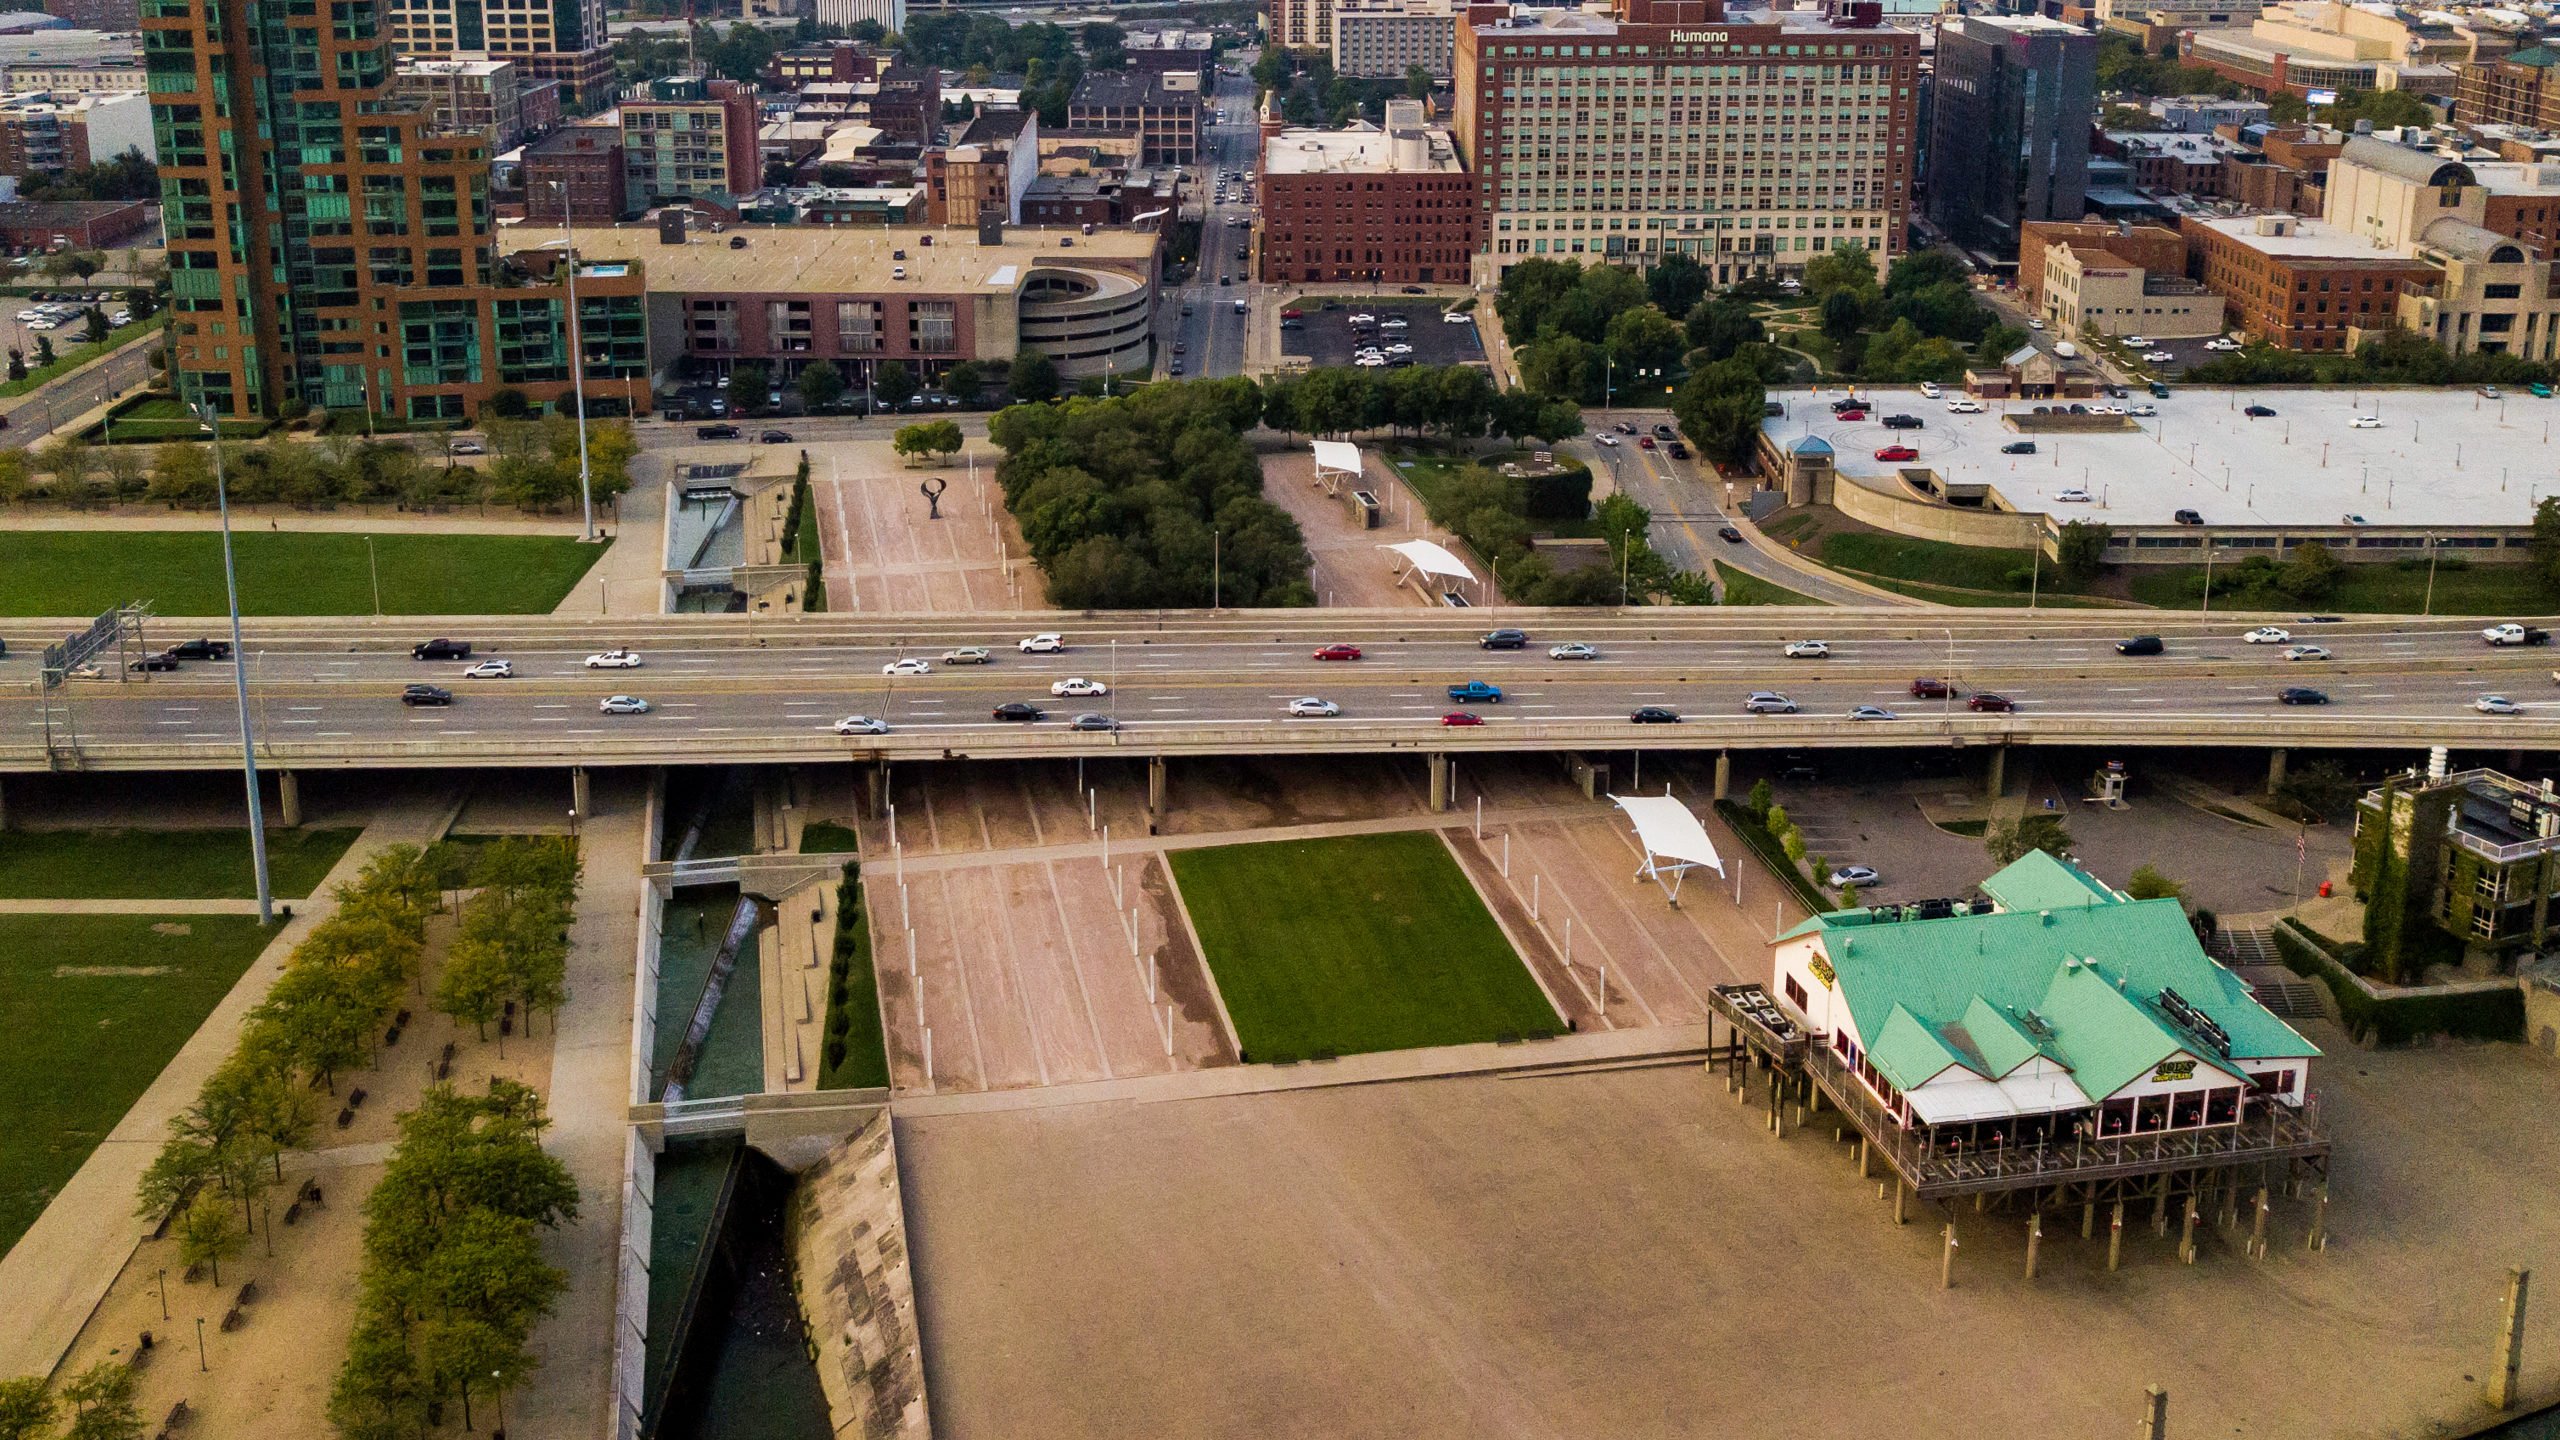 Searching for the perfect event venue? – Waterfront Park